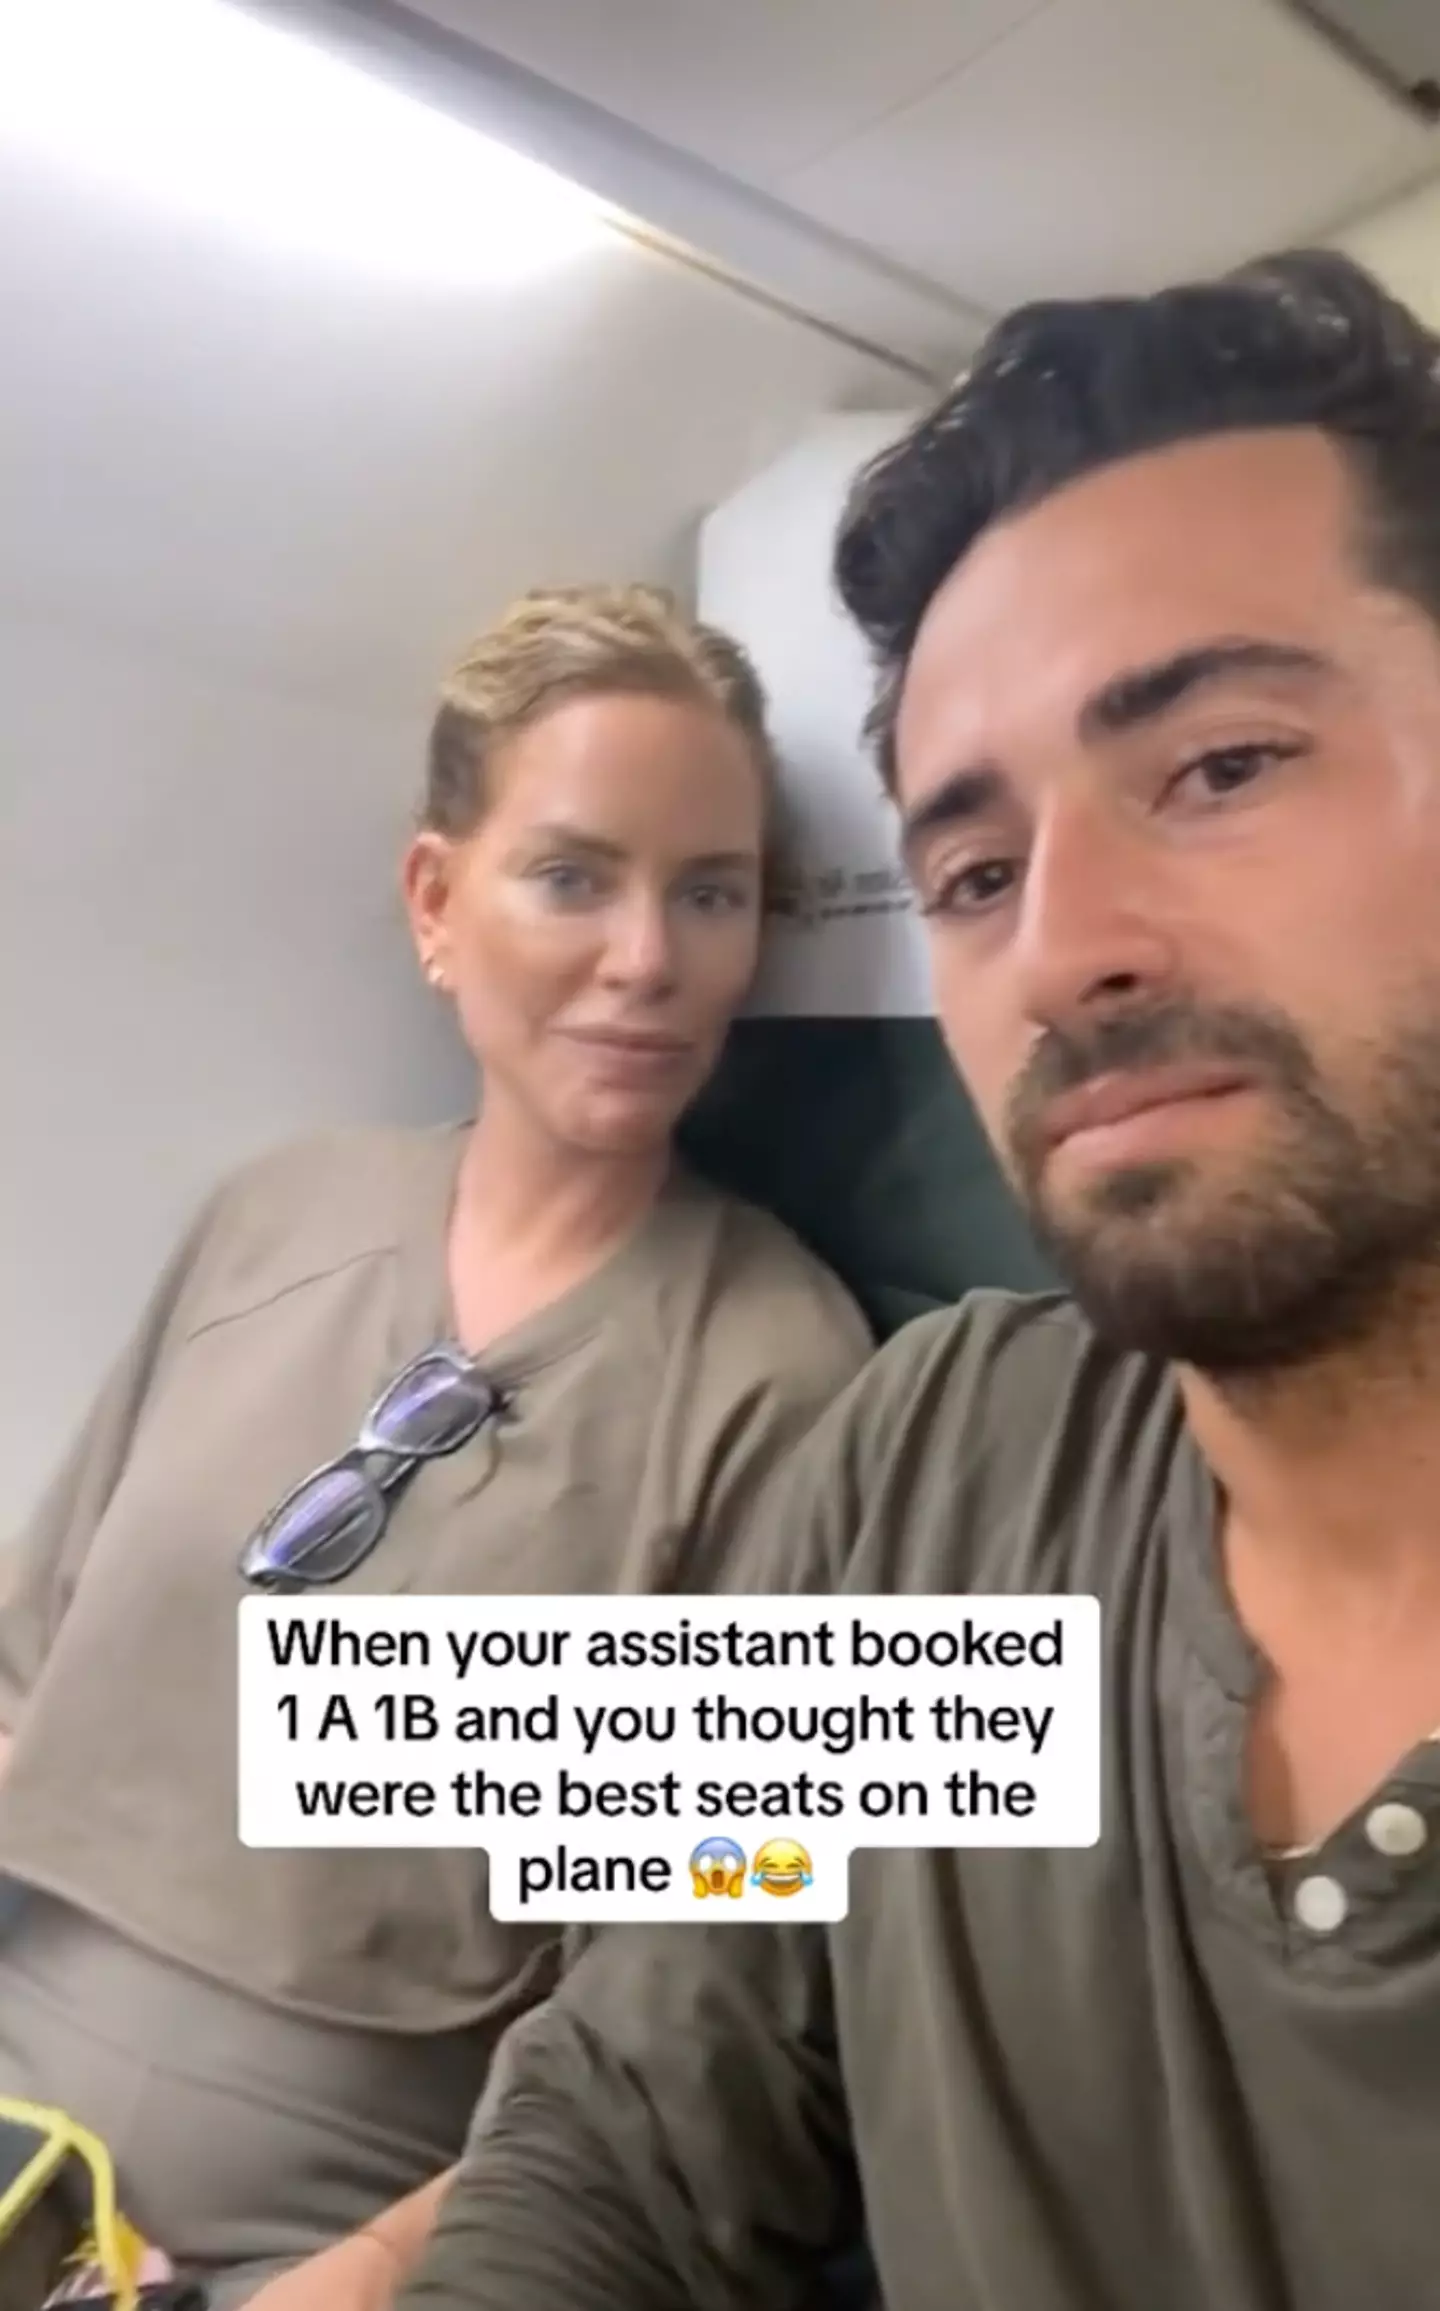 The celeb couple were left mortified by the supposed 'best seats' on the plane.